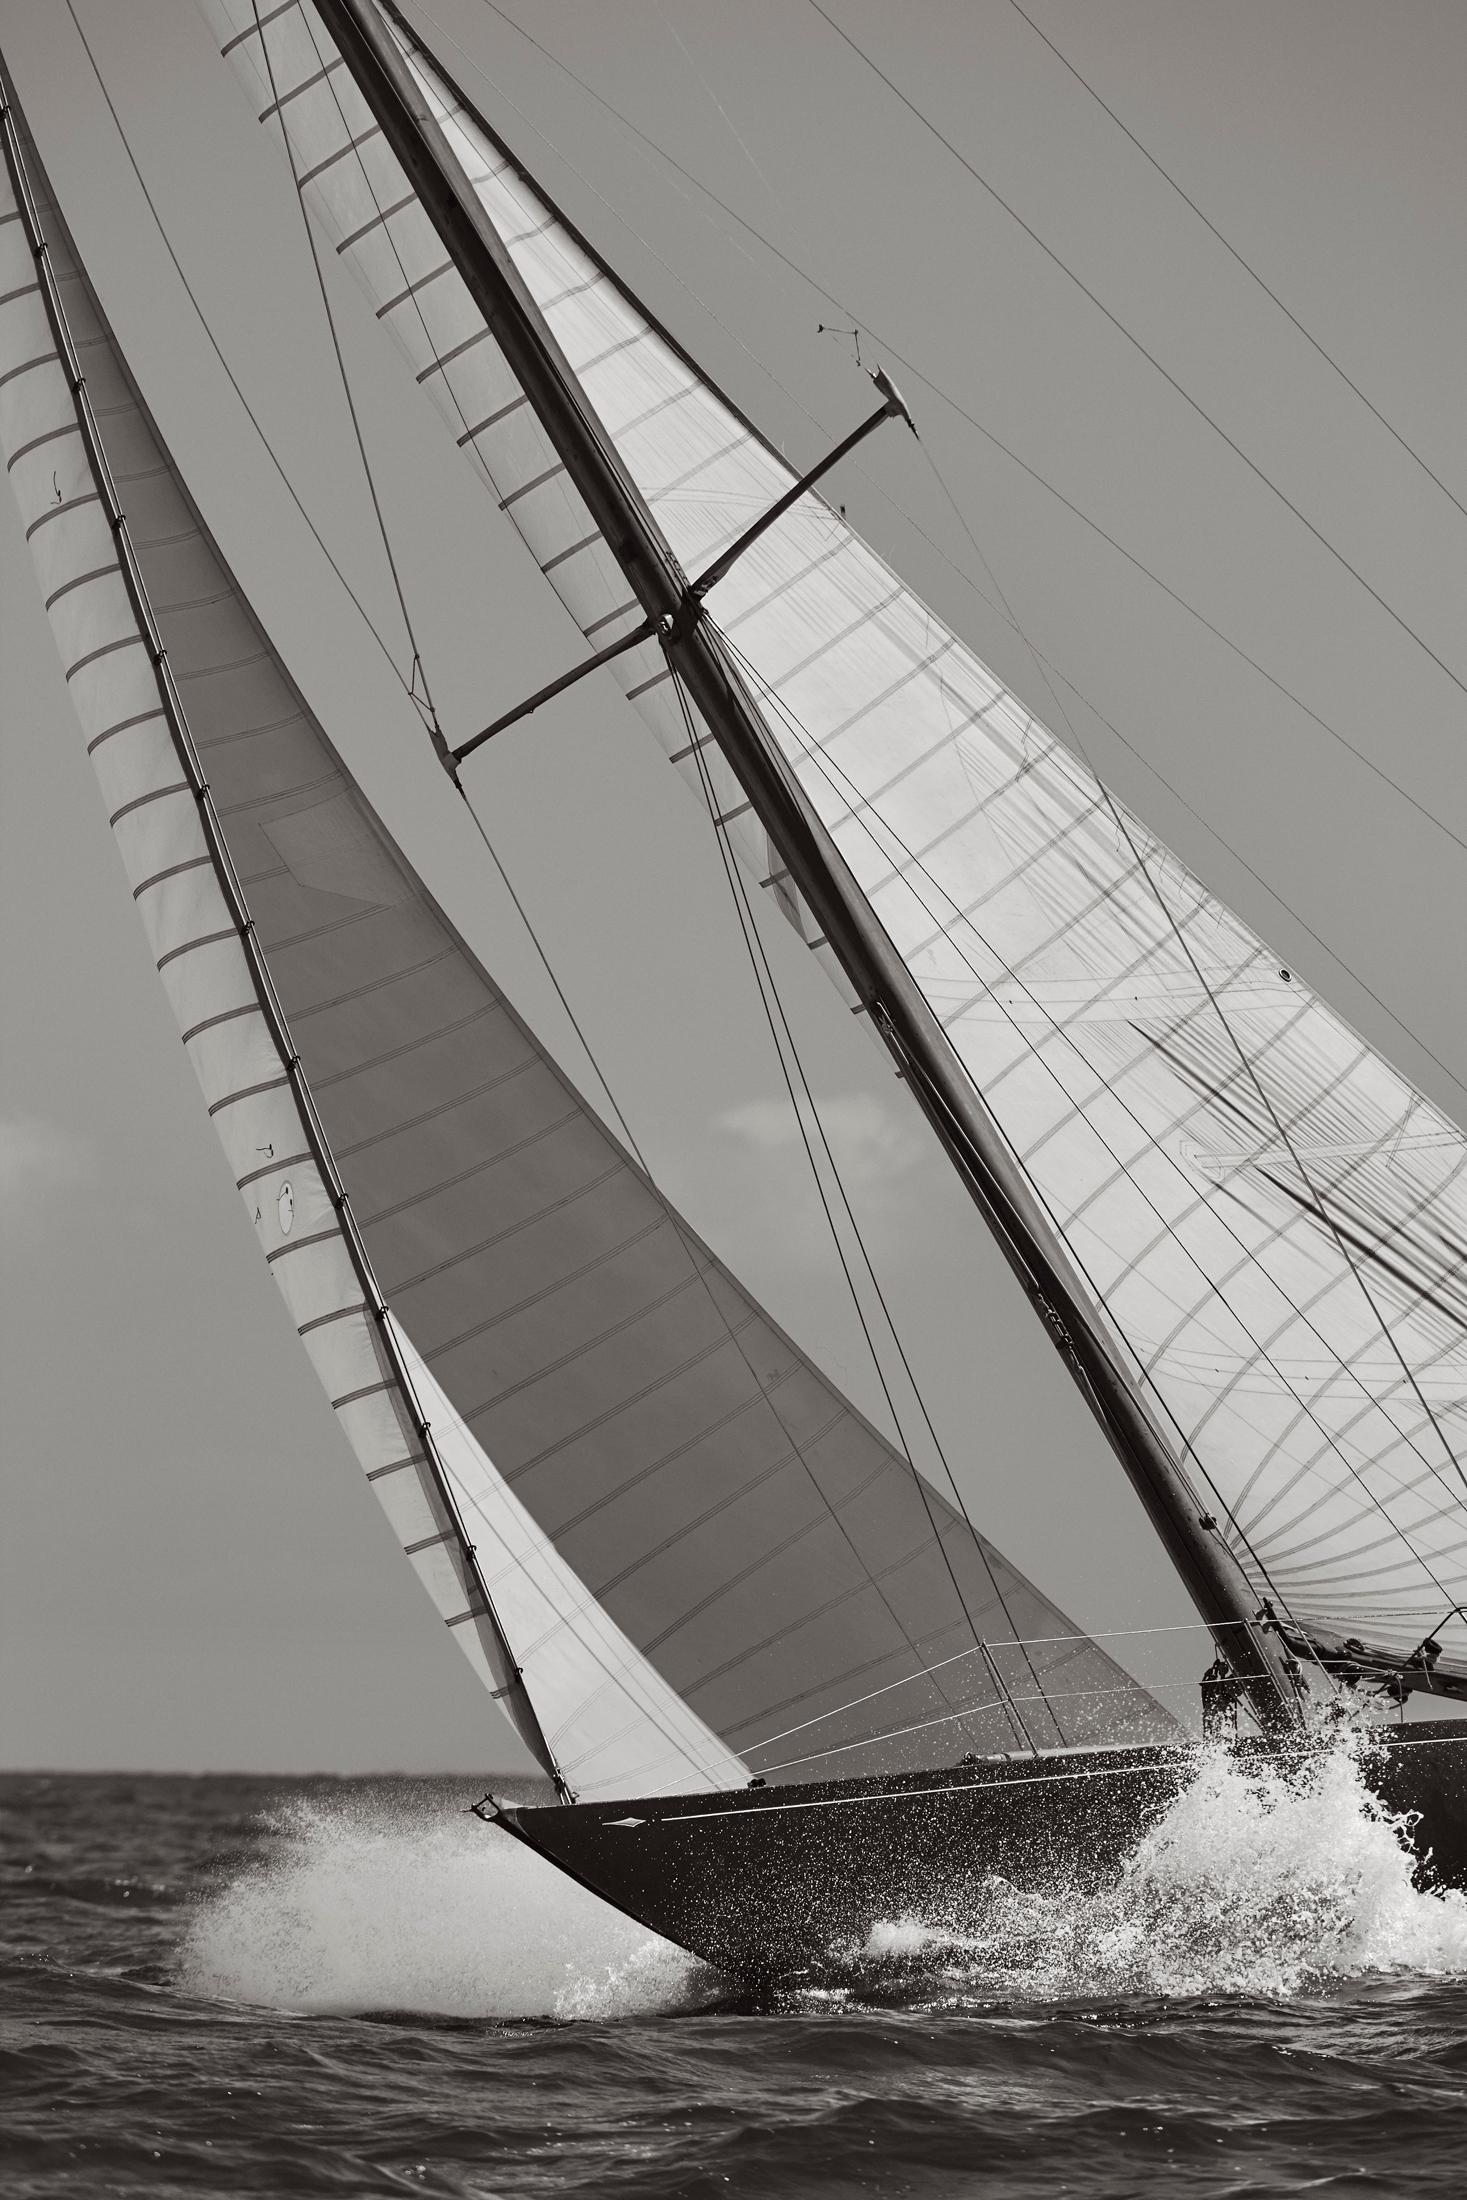 Drew Doggett Black and White Photograph - The racing yachts Northern Light sailing across the Atlantic Ocean